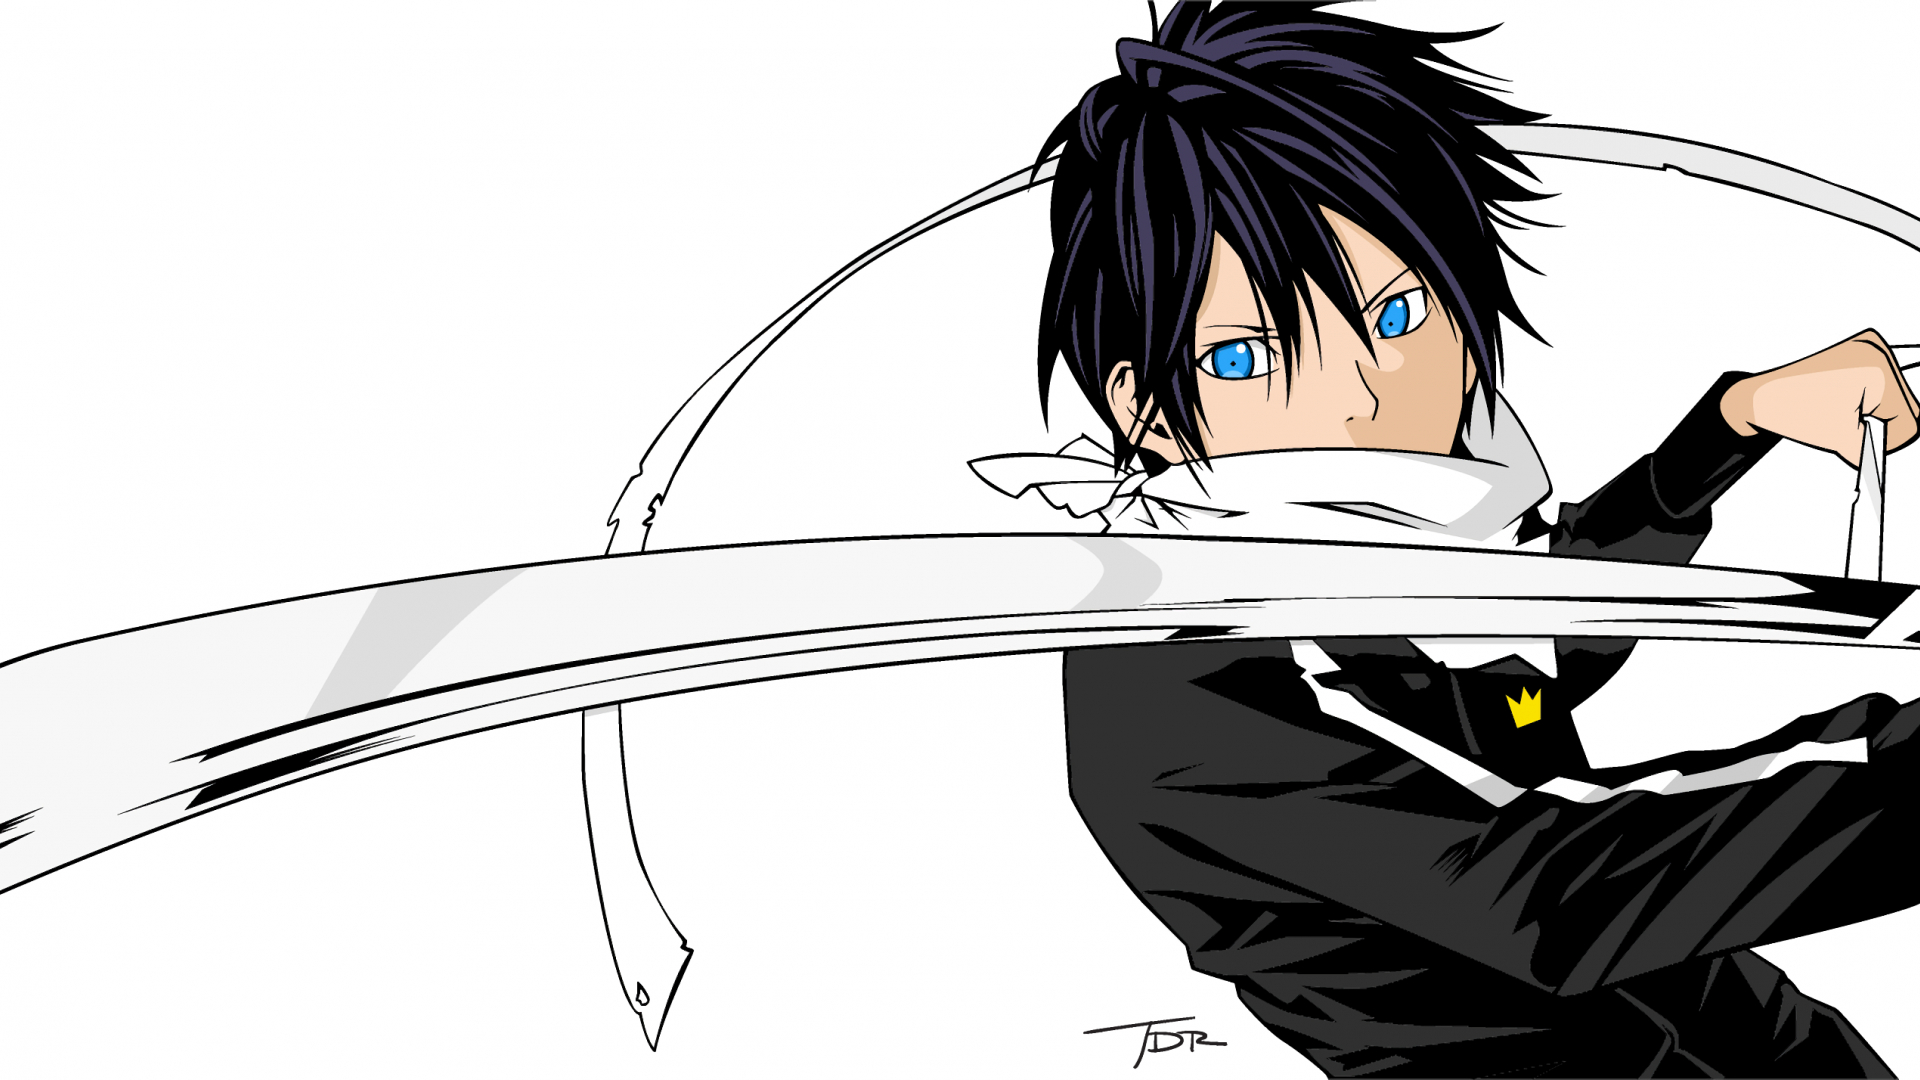 1920x1080 Desktop Wallpaper Yato Of Noragami Anime, Hd Image, Picture, Background, 8ovyfx